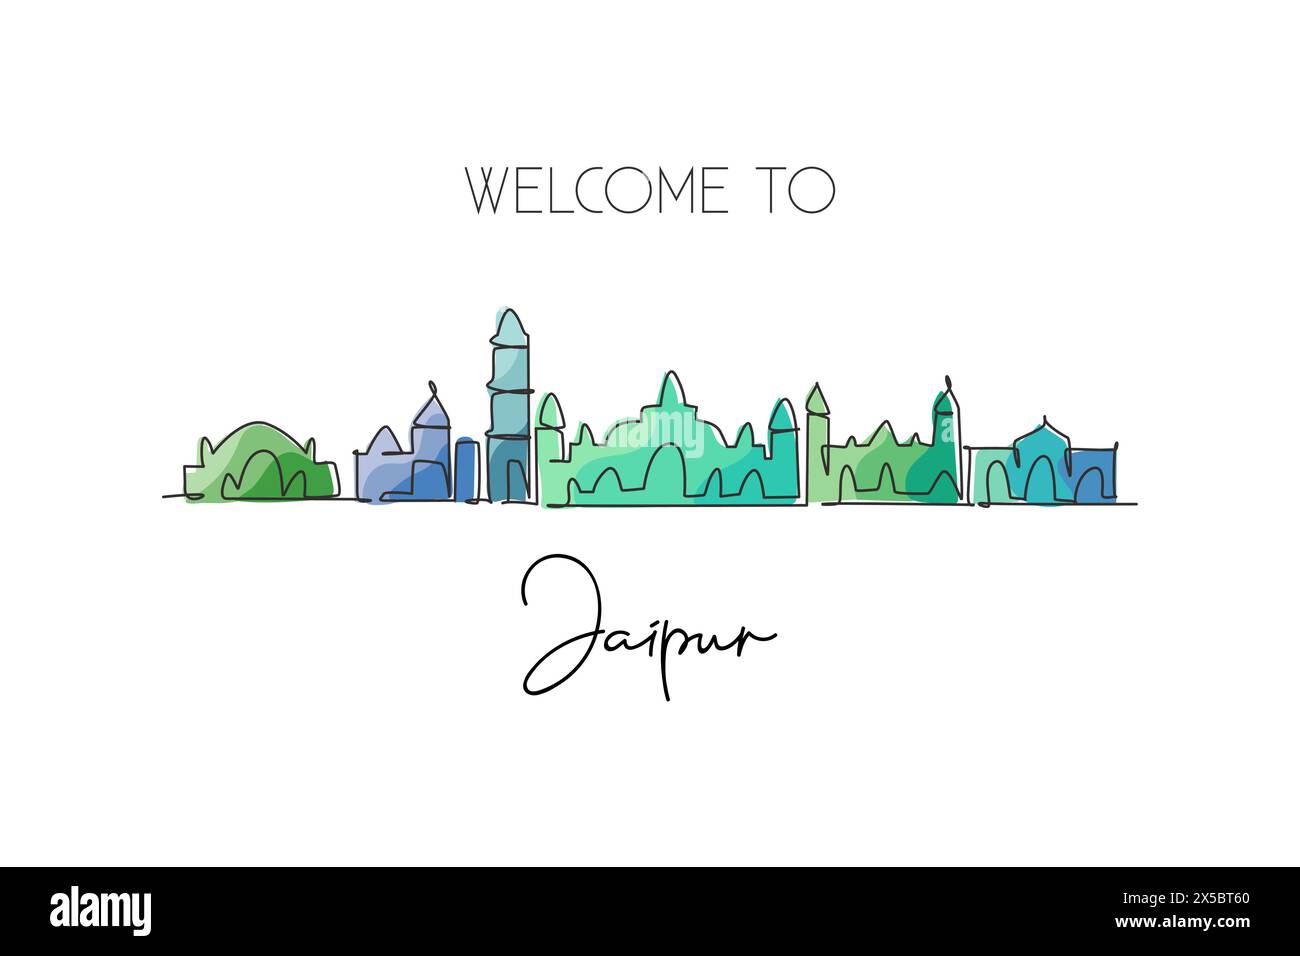 Single continuous line drawing of Jaipur city skyline, India. Famous city scraper landscape. World travel home wall decor art poster print concept. Mo Stock Vector